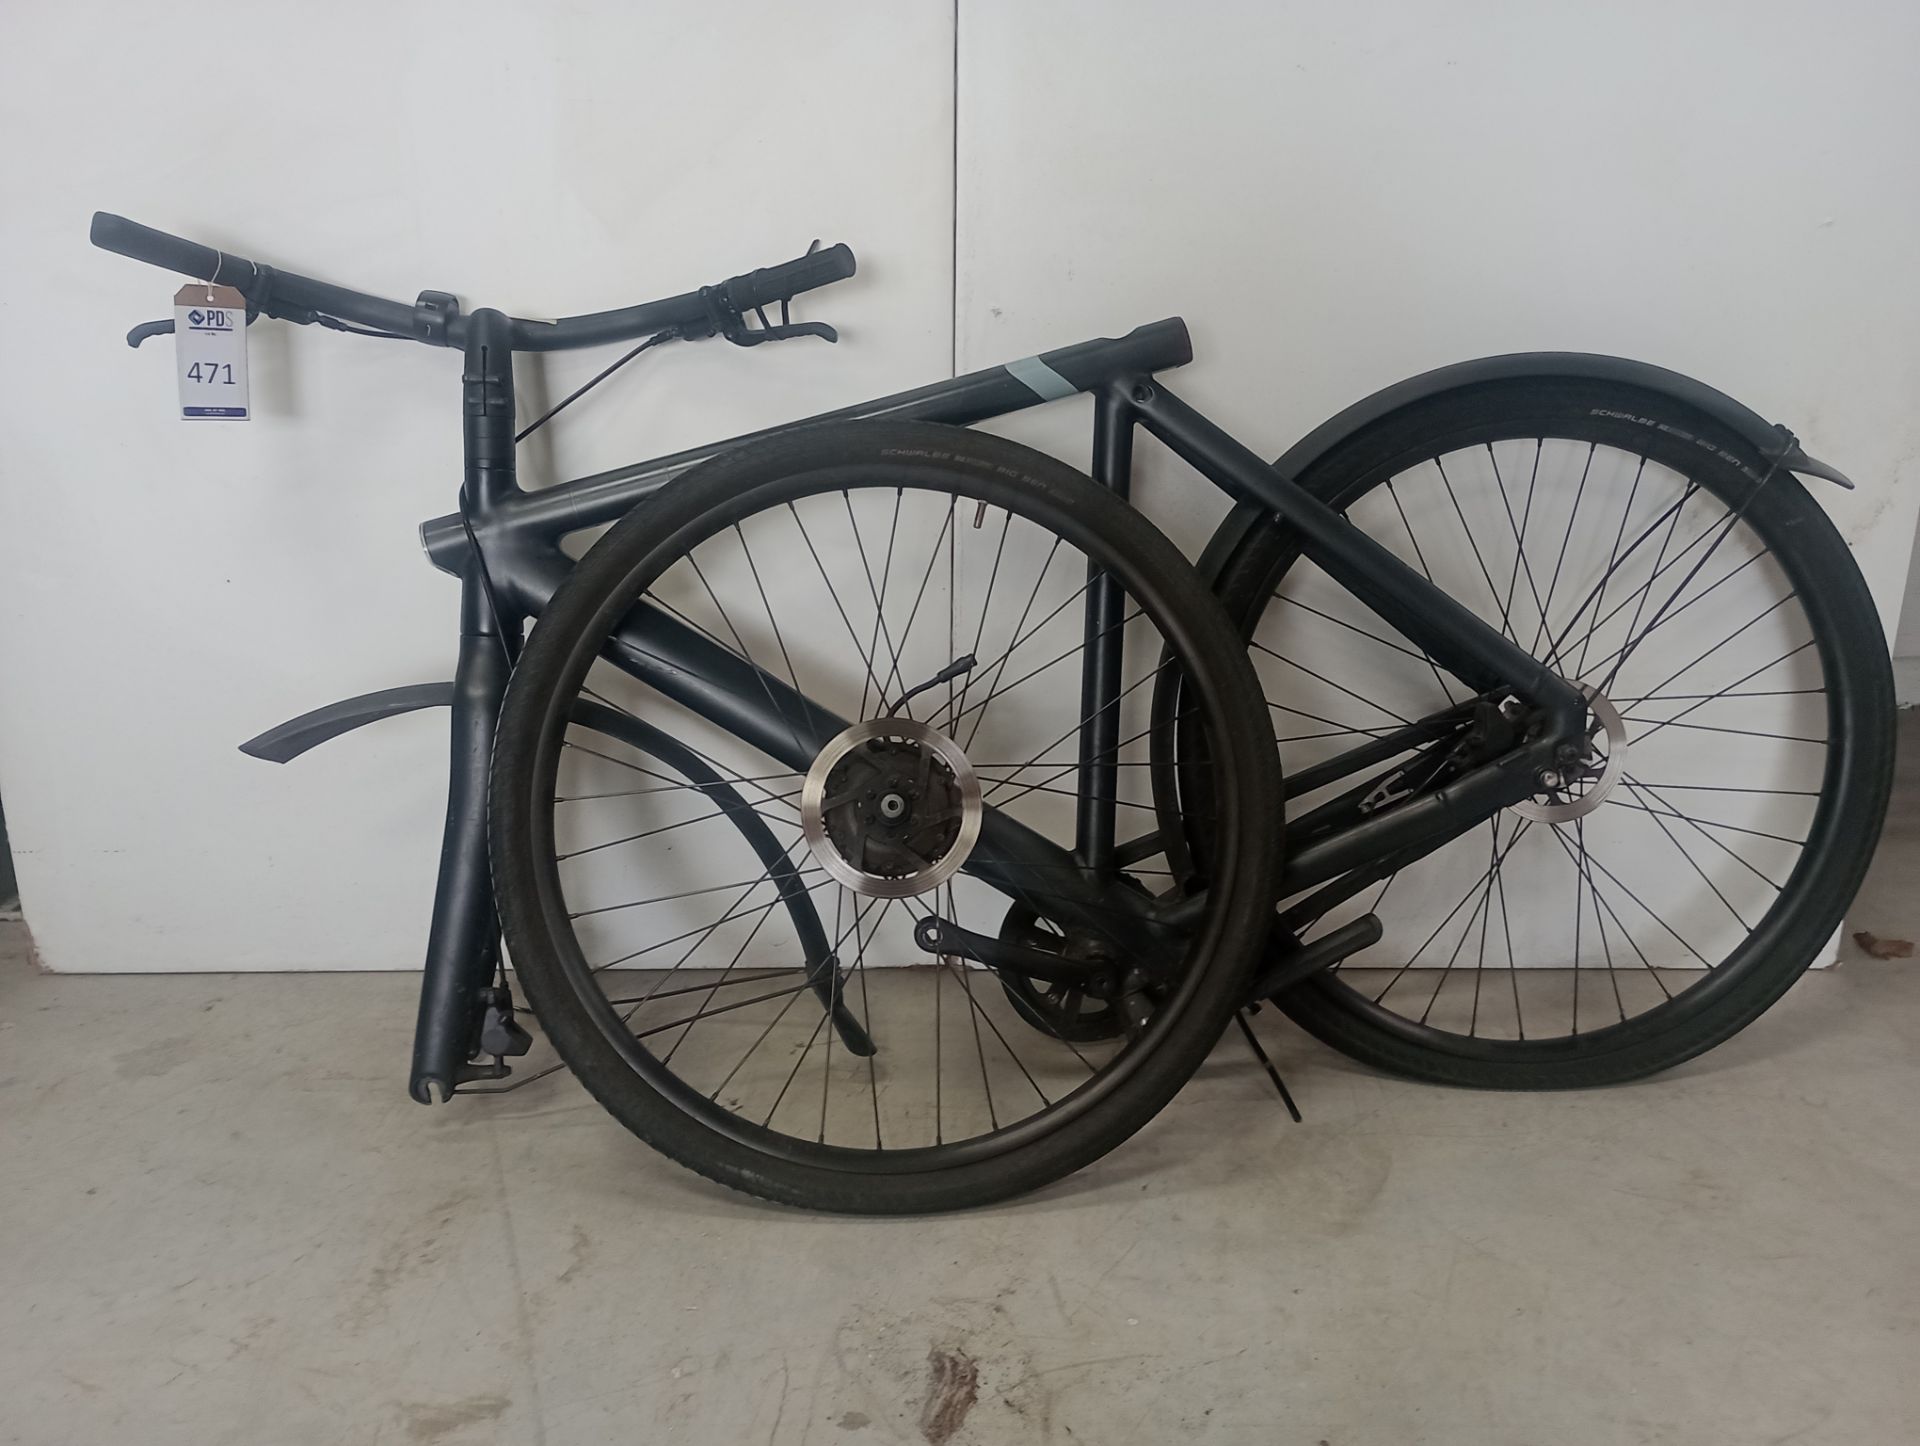 VanMoof S3 Electric Bike, Frame Number ASY1029546 (NOT ROADWORTHY - FOR SPARES ONLY) (No codes